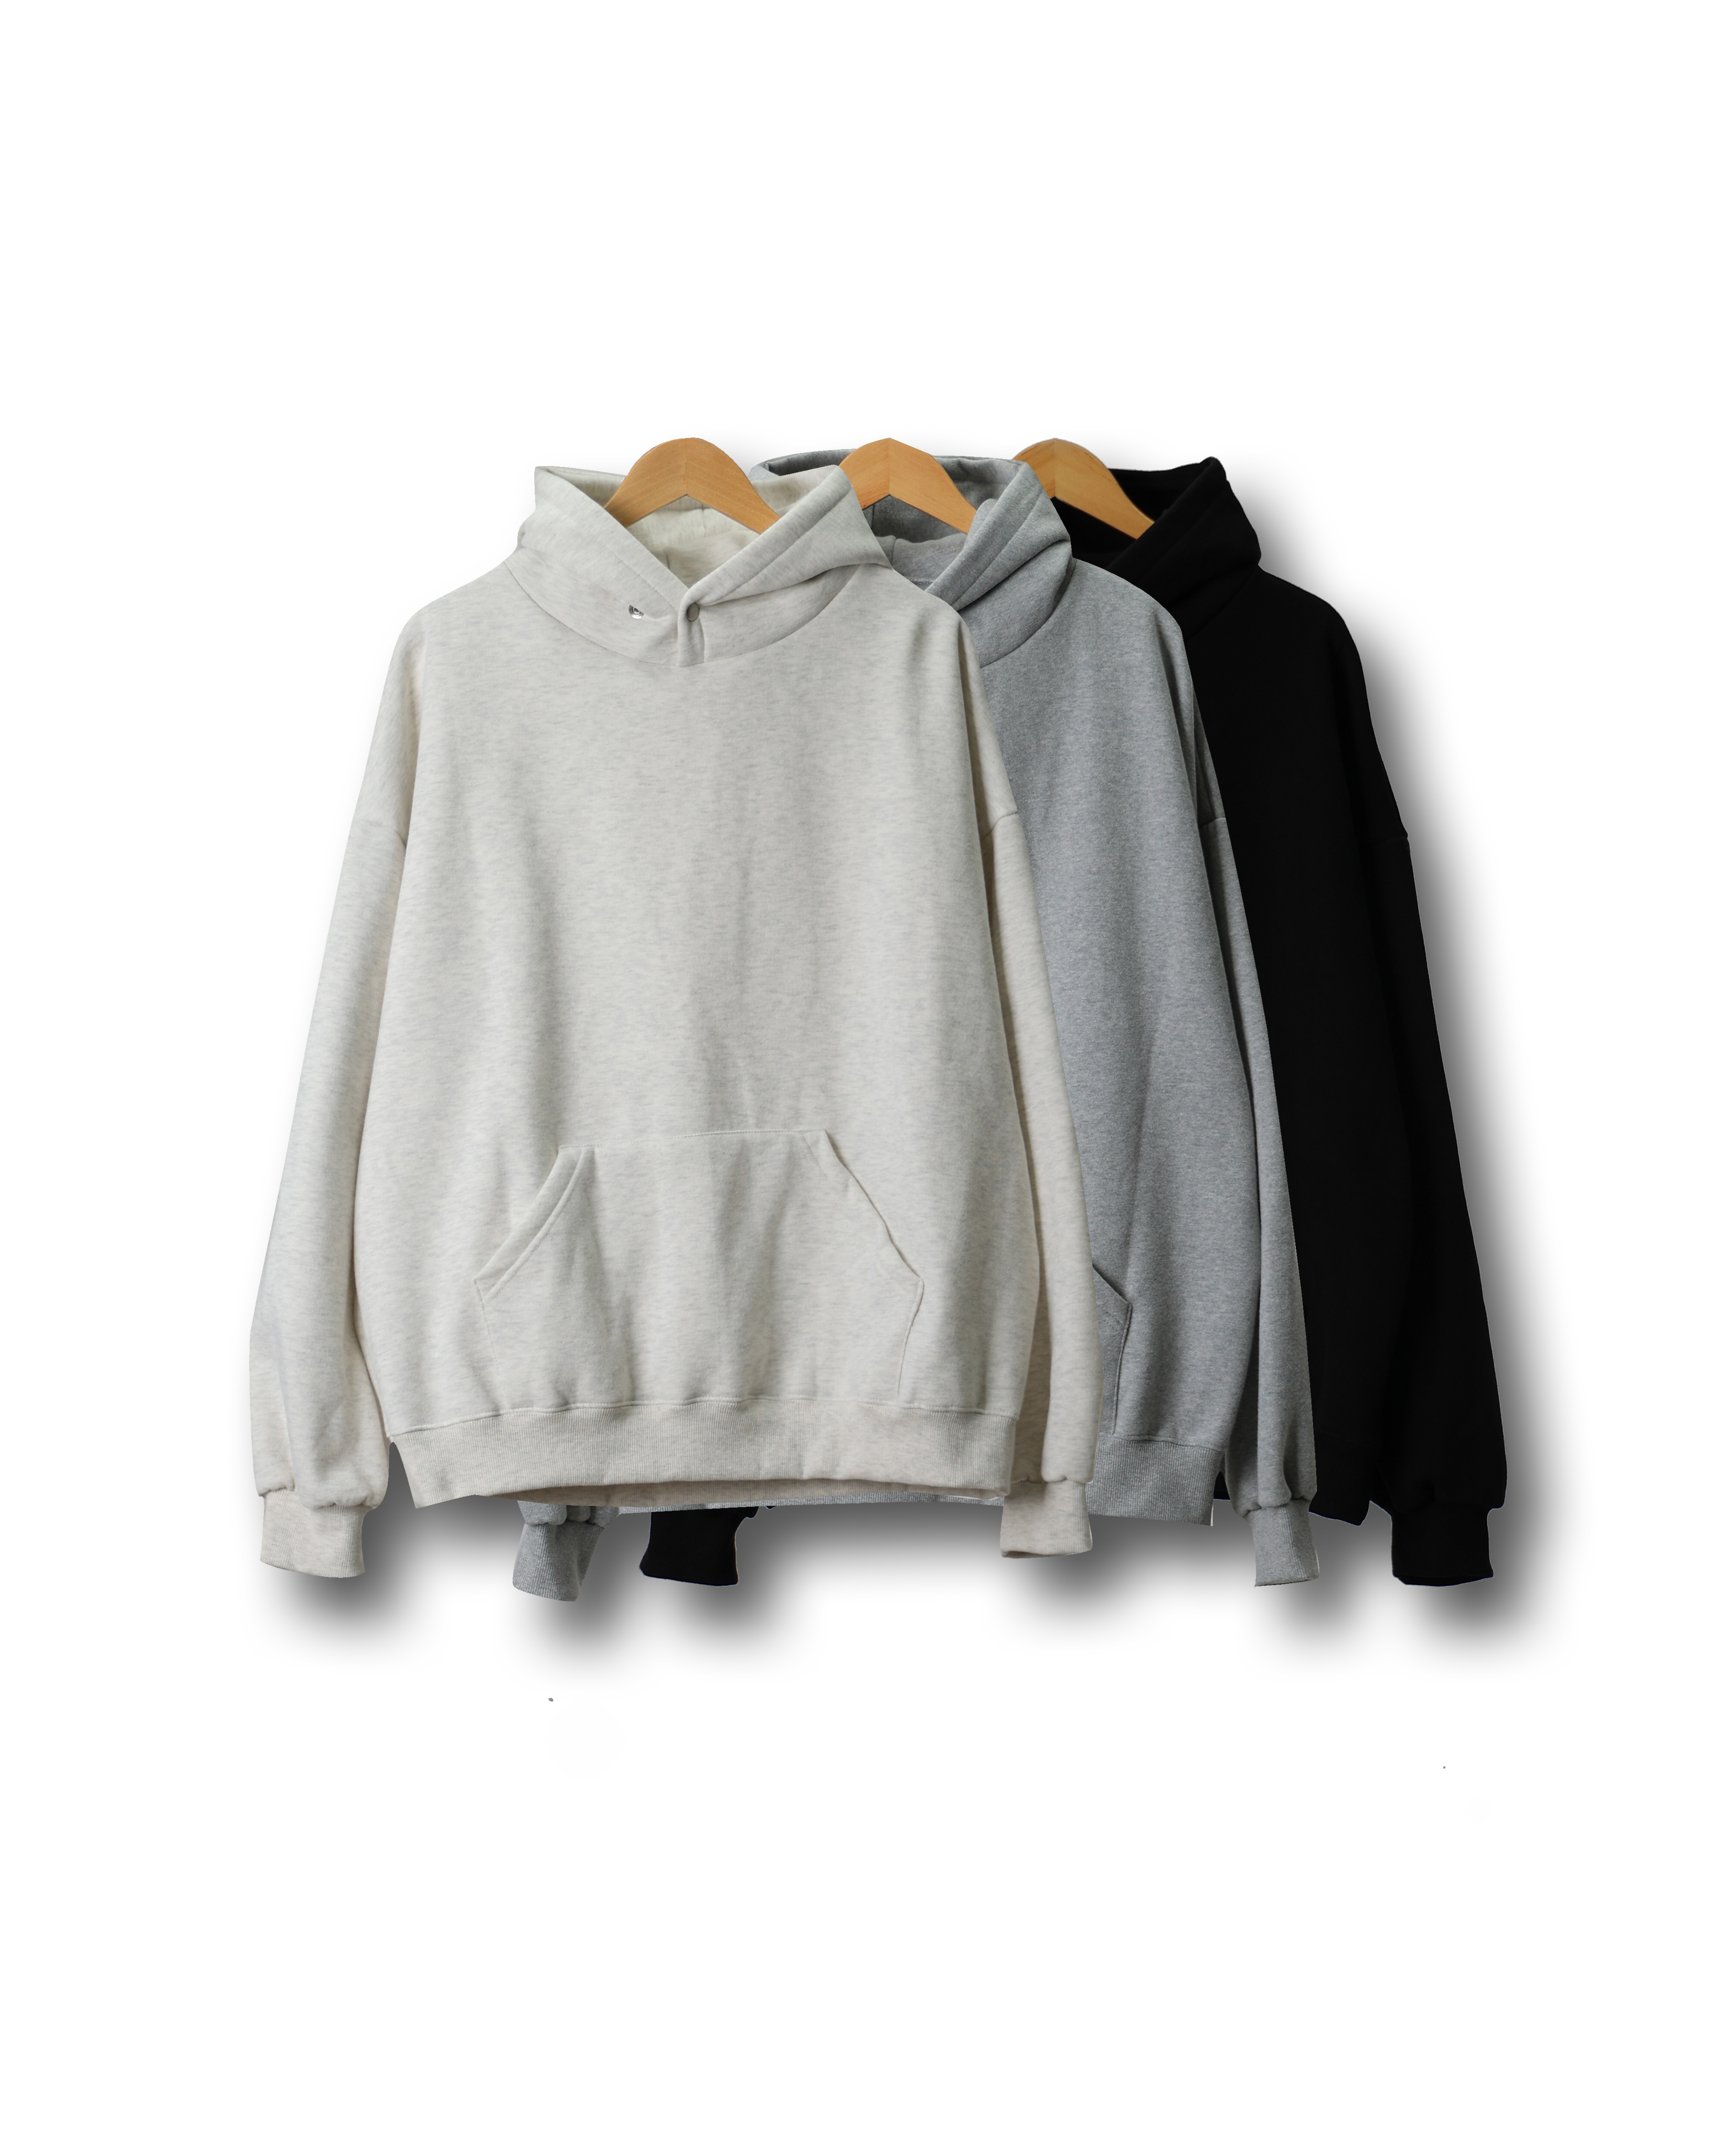 COITZ Double Napping Snap Hoodie (Black/Gray/Oatmeal)